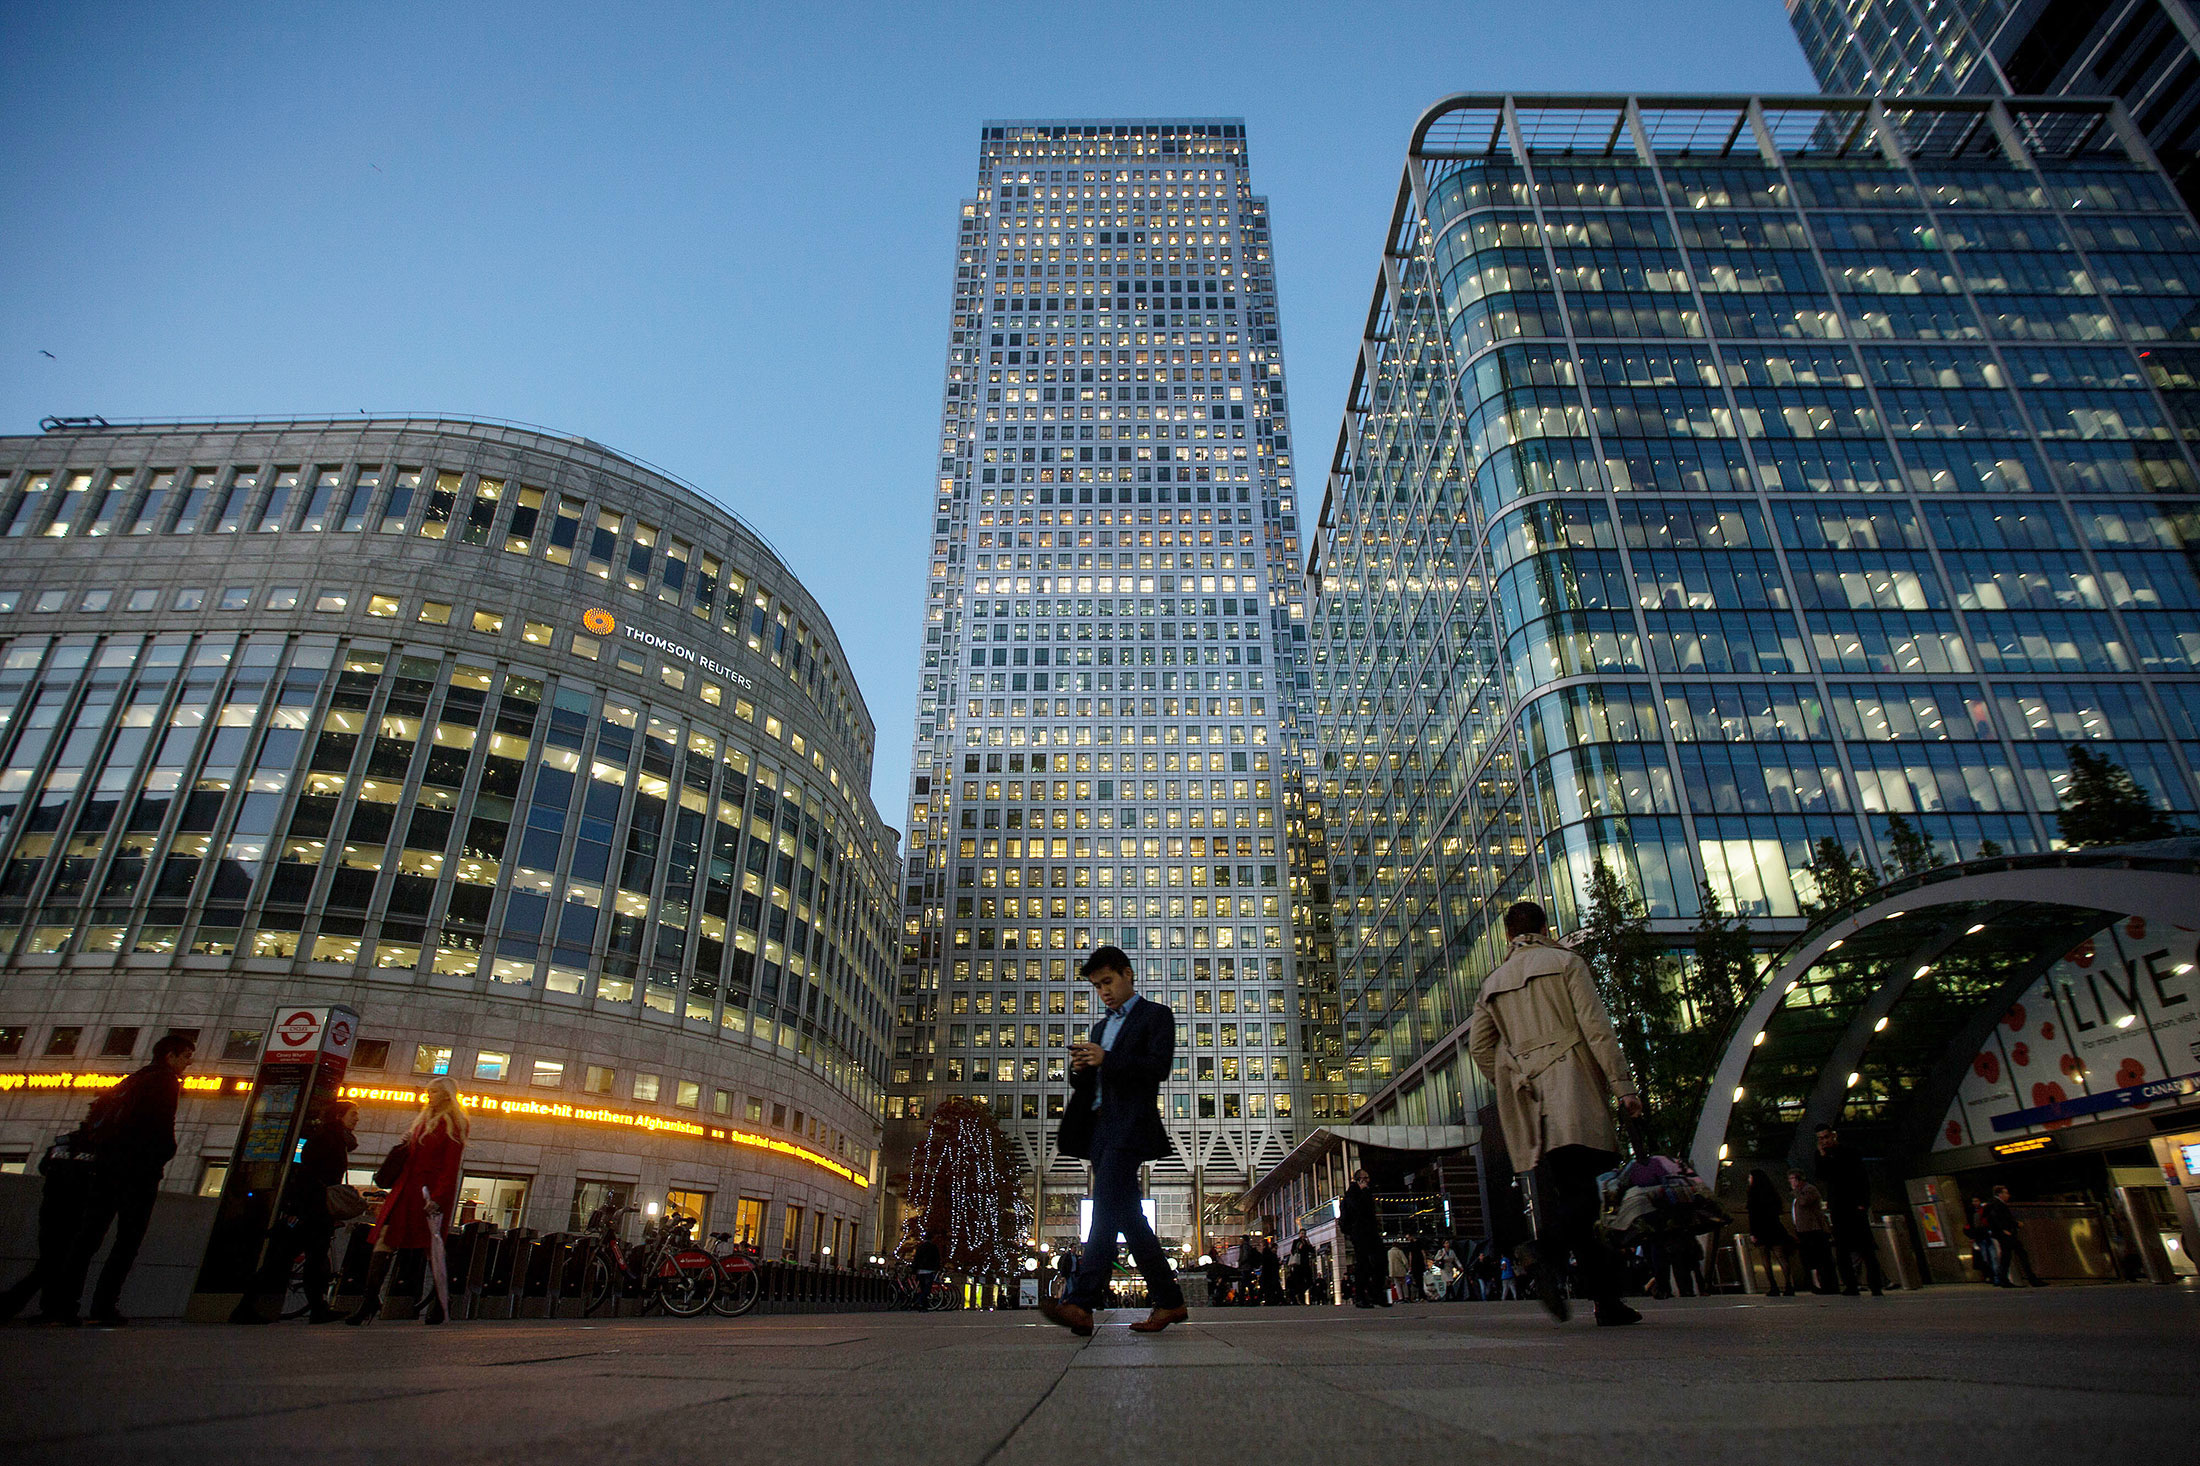 Canary Wharf Business, Financial And Shopping District As Britons Are Worried About The Outlook For The Economy